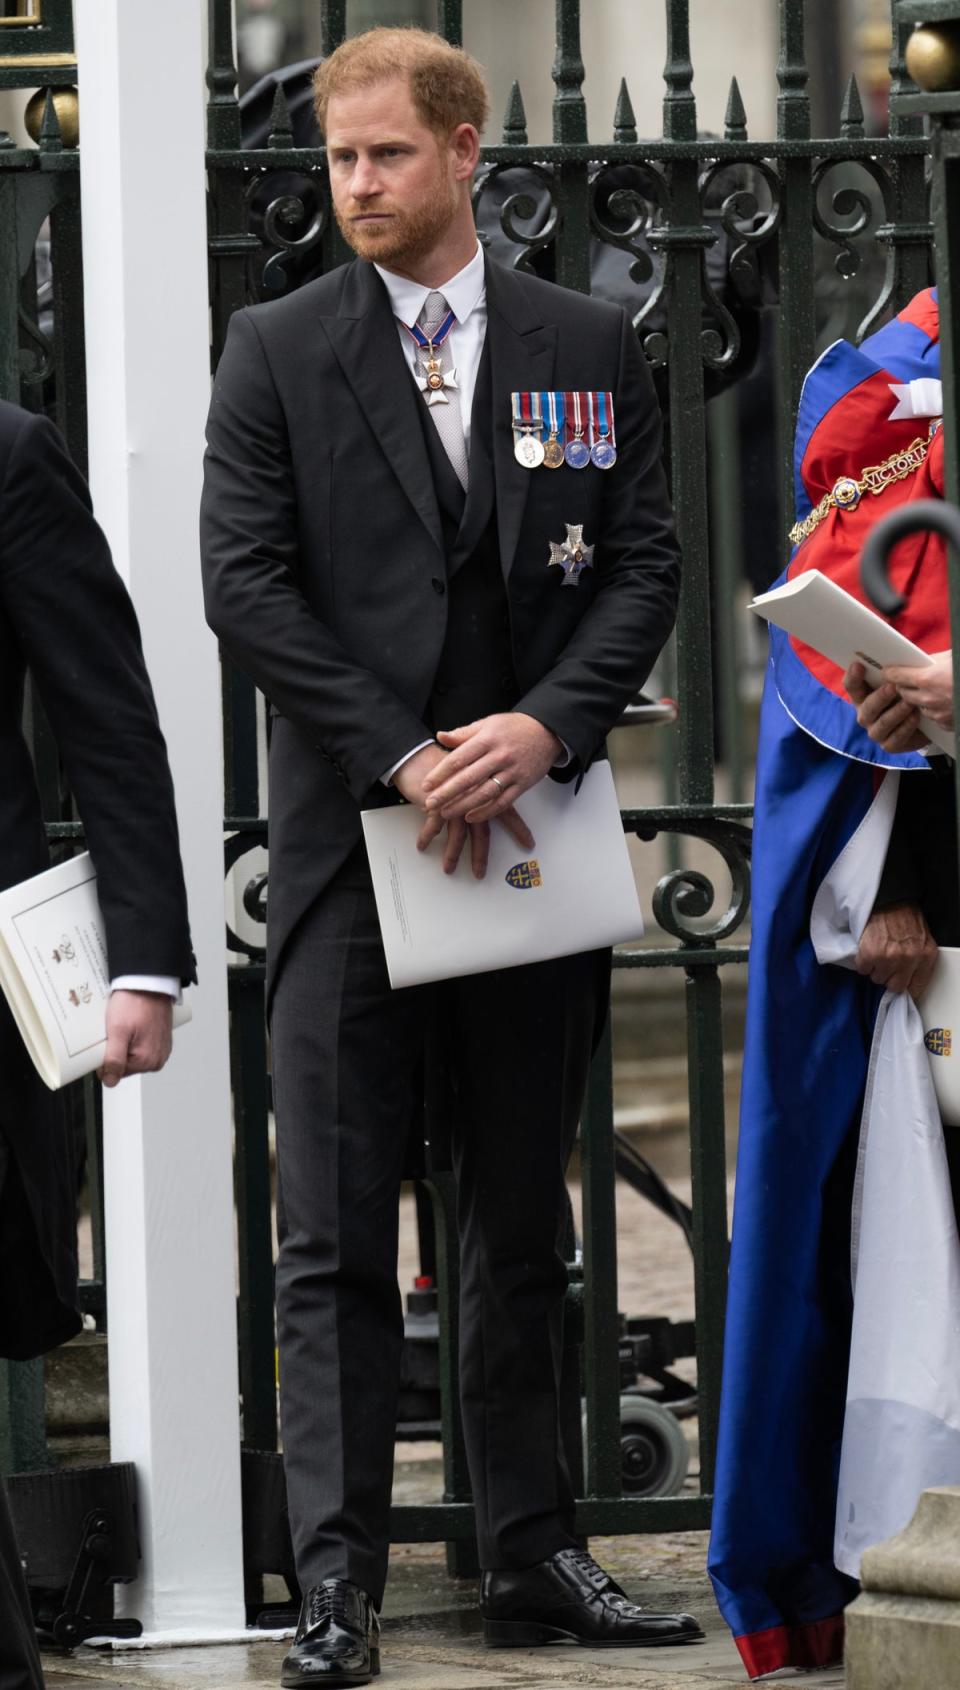 Prince Harry, Duke of Sussex attends the Coronation of King Charles III and Queen Camilla at Westminster Abbey on May 6, 2023 (Getty Images)